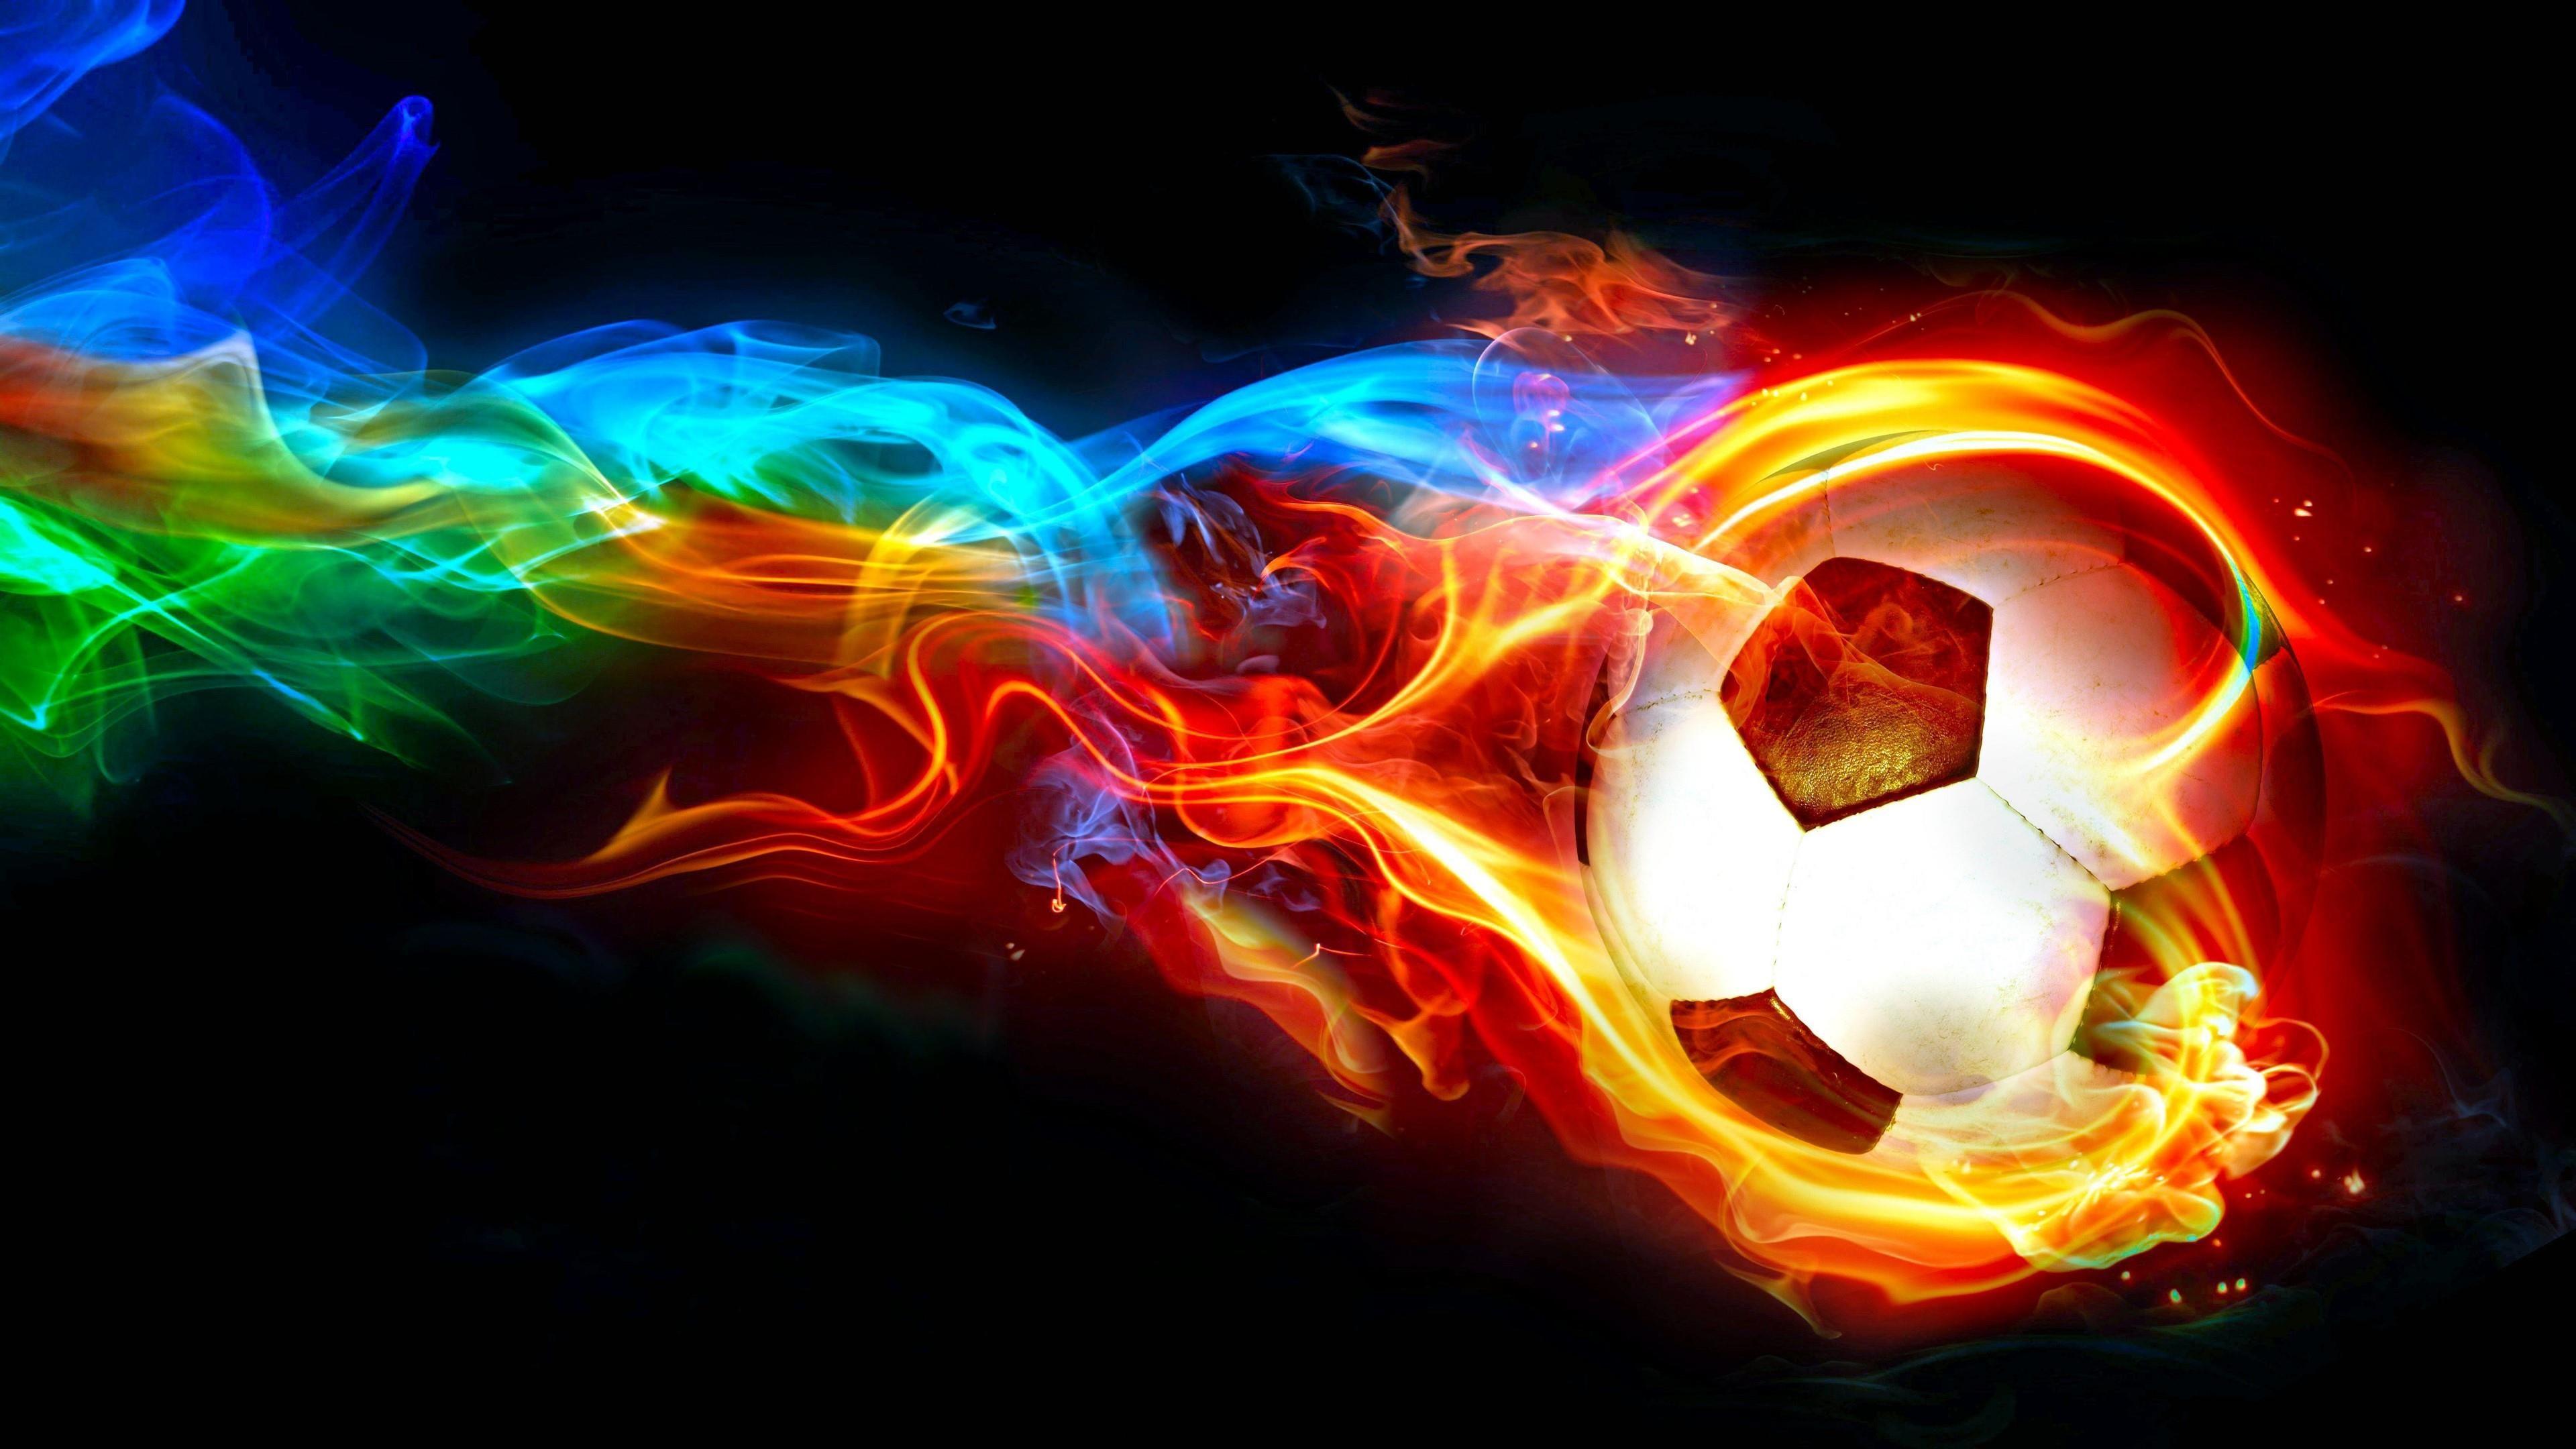 Cool Soccer Ball Wallpapers Wallpapers